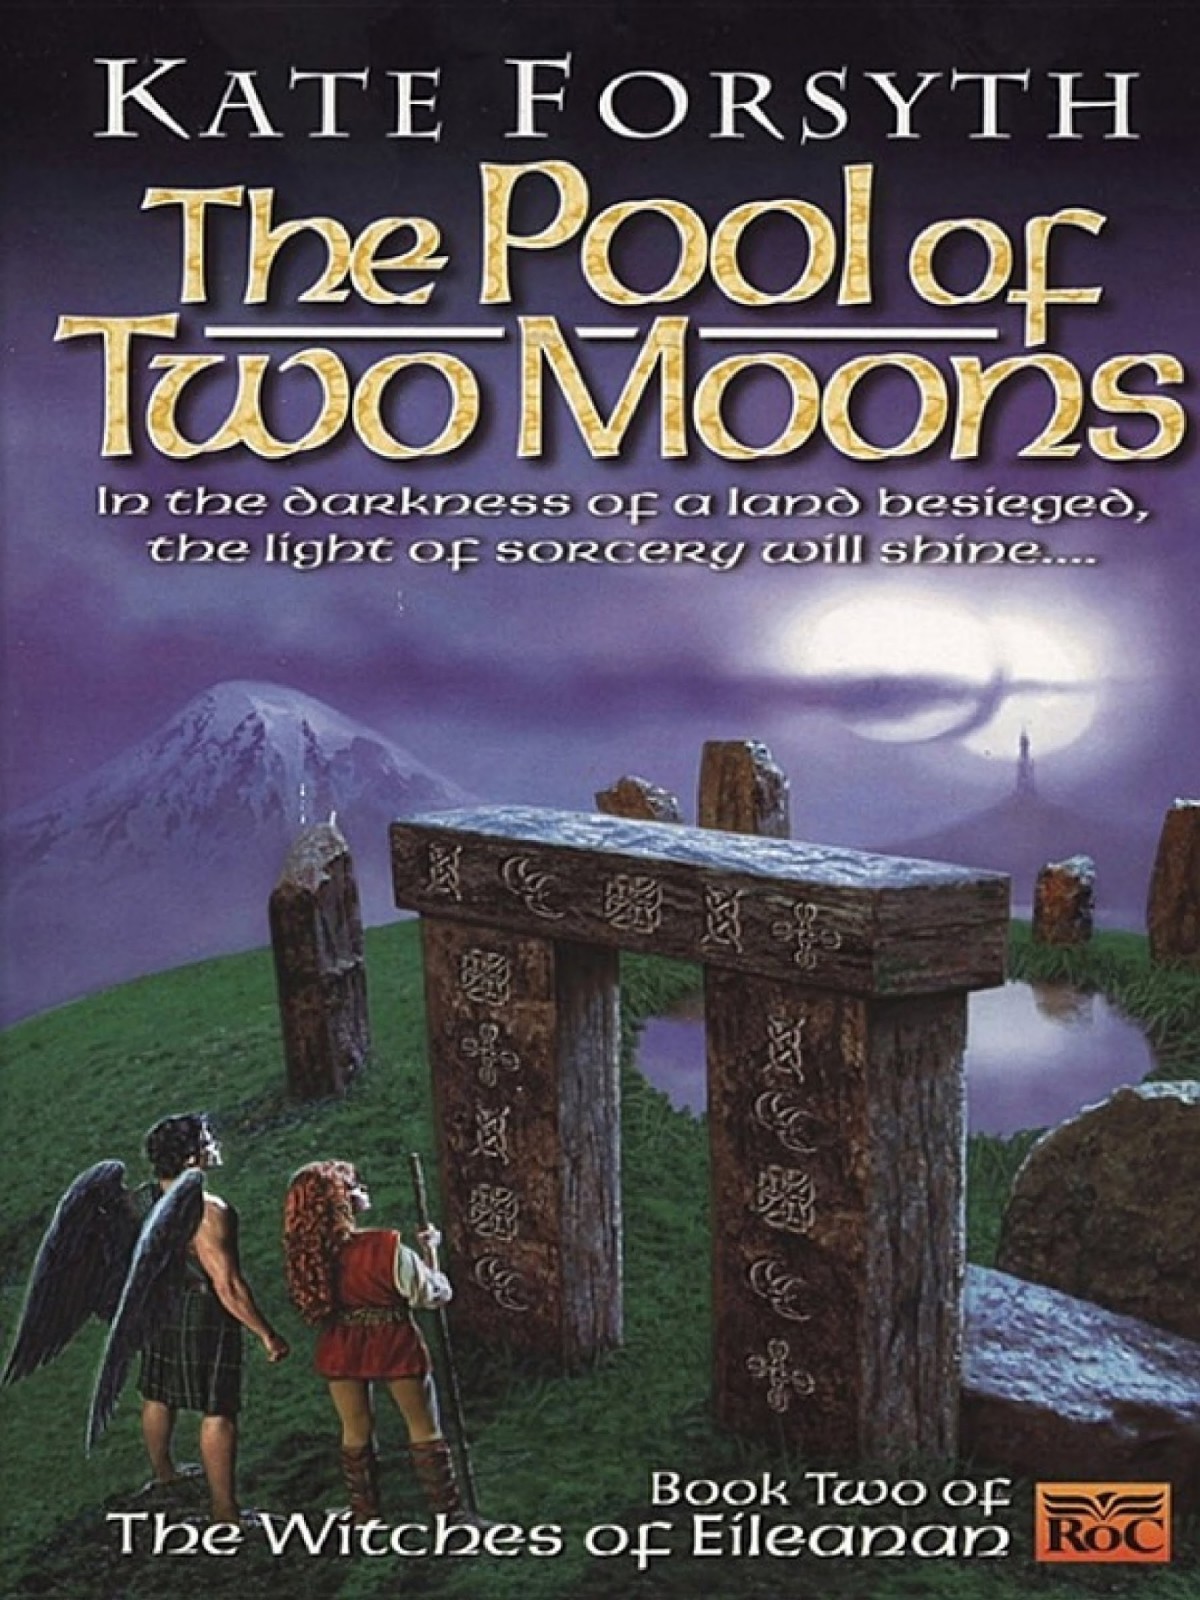 The Pool of Two Moons